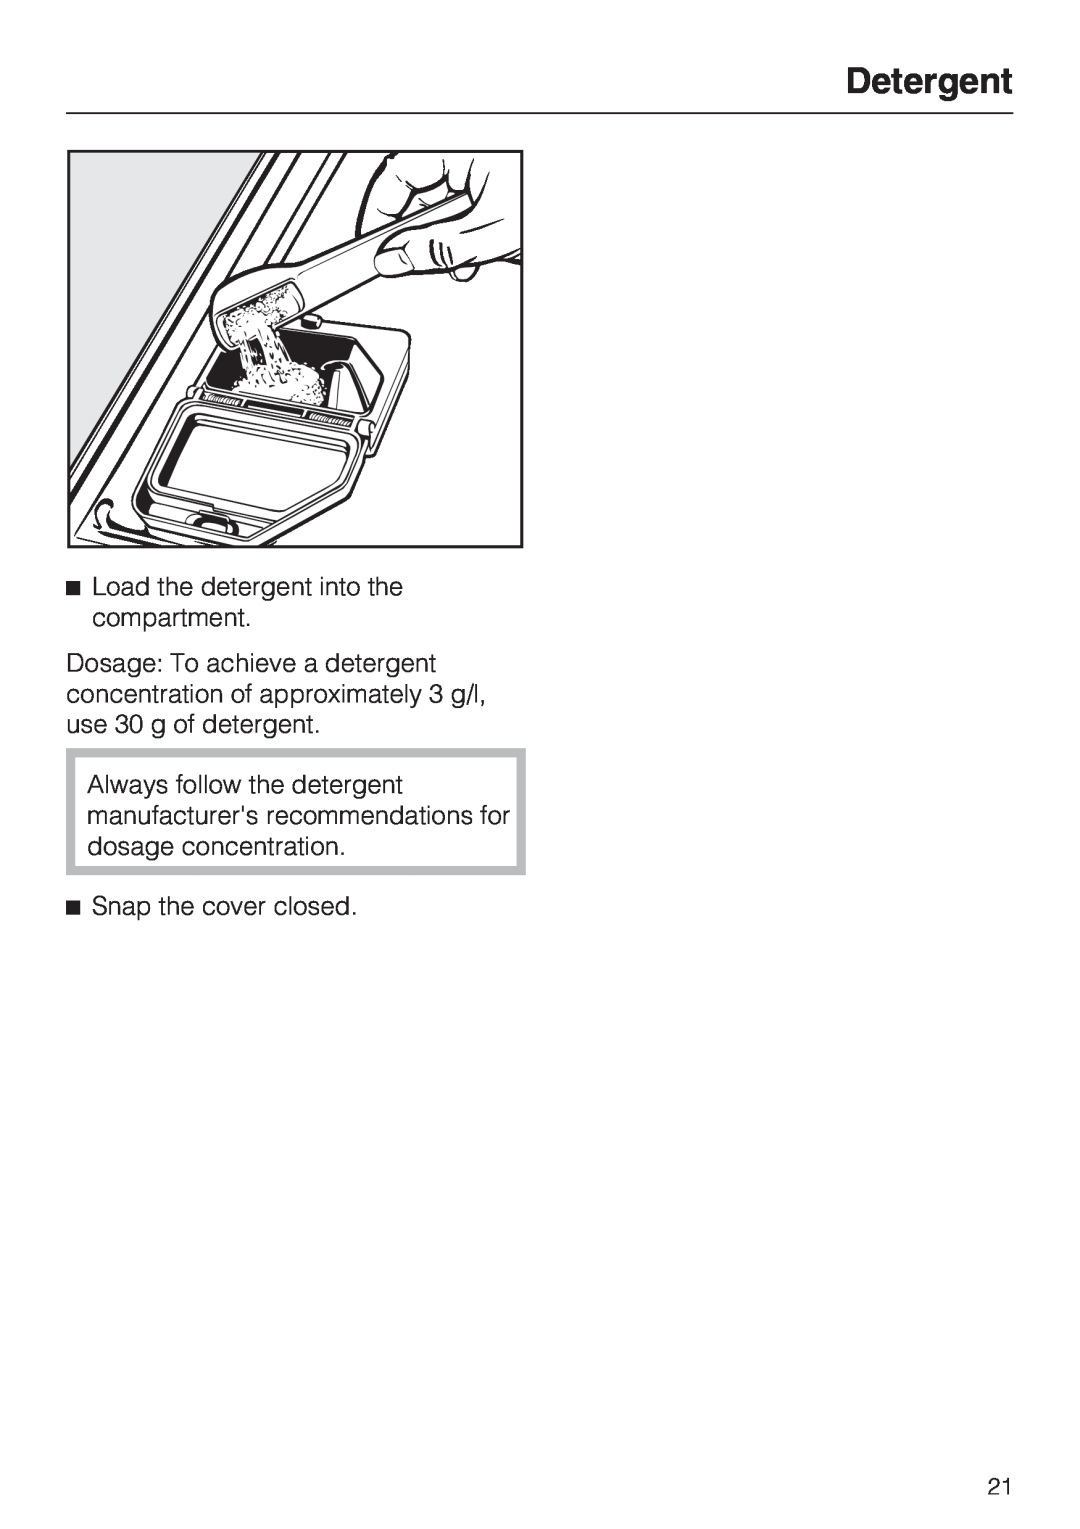 Miele G 7883 installation instructions Detergent, Load the detergent into the compartment, Snap the cover closed 